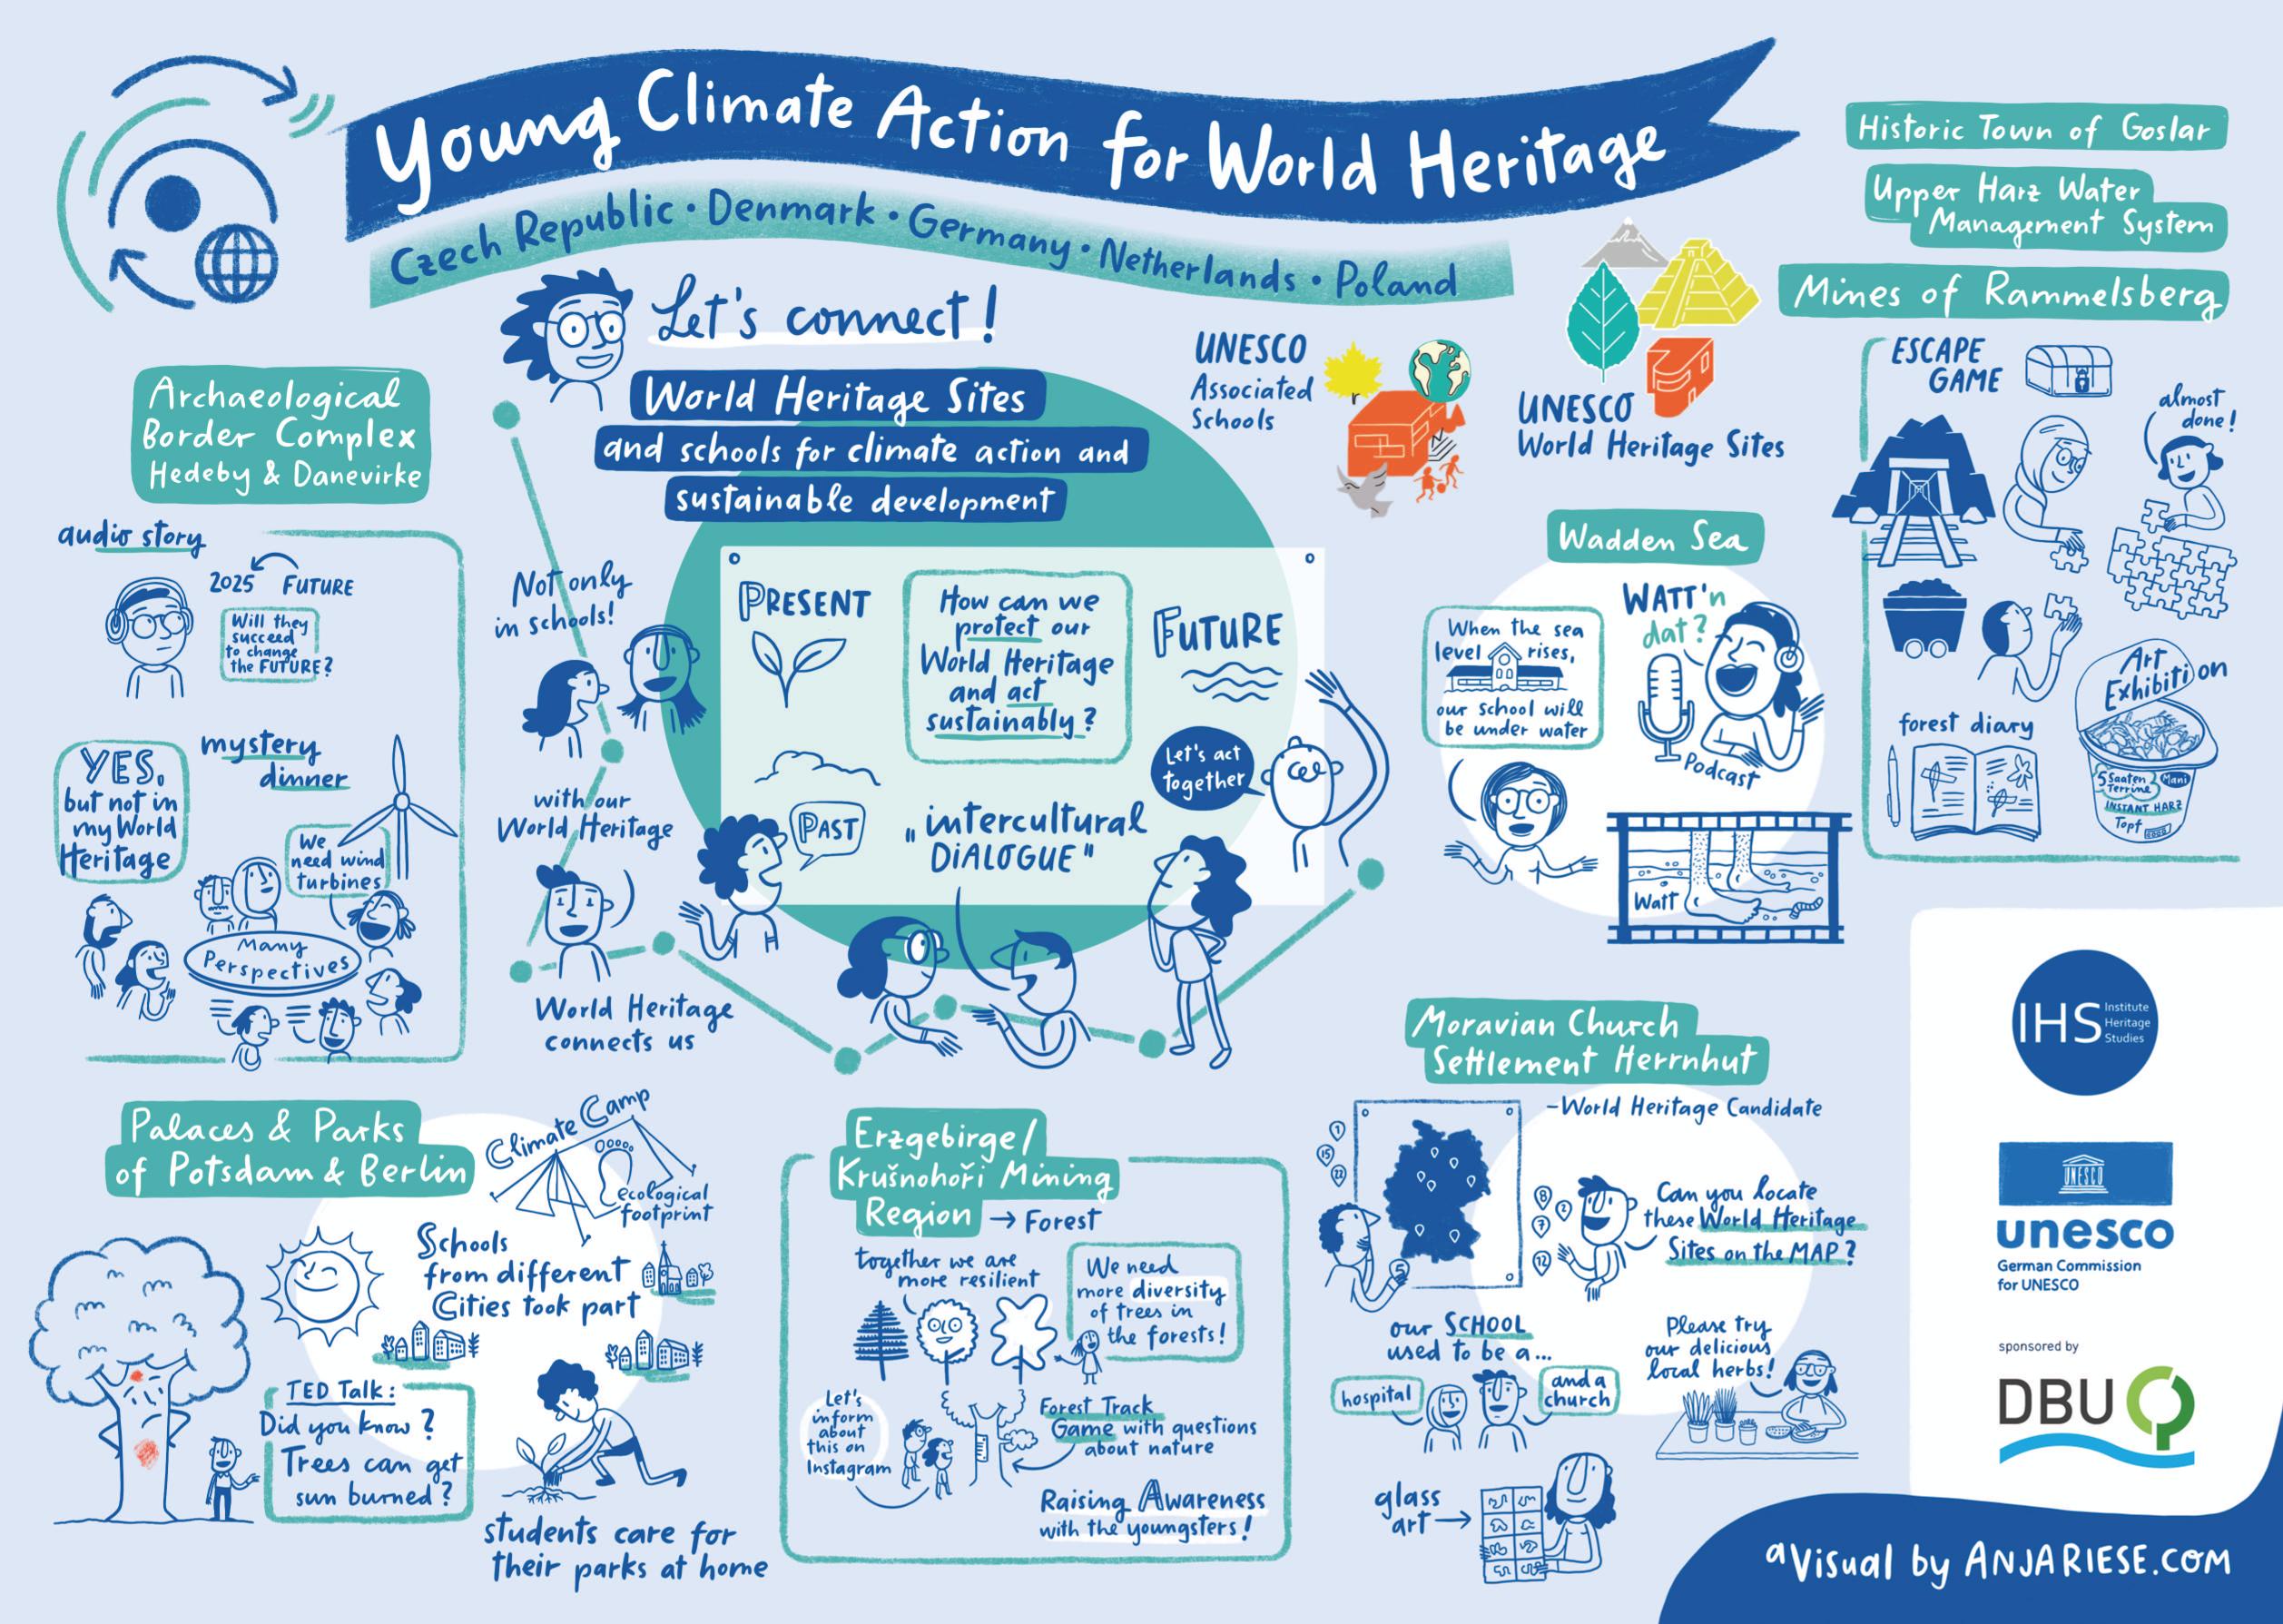 Youg Climate Action for World Heritage